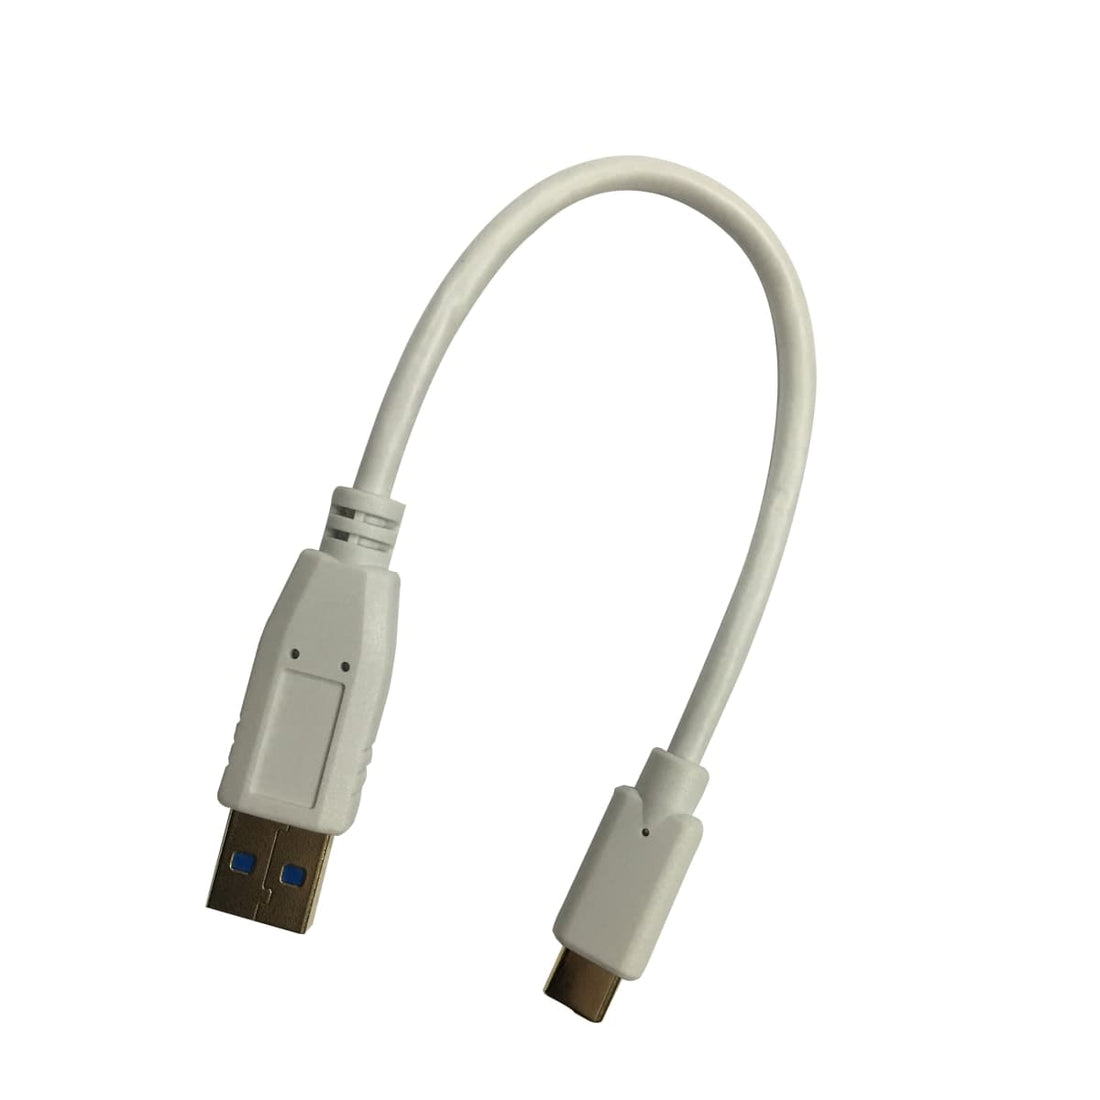 0.2 M SUPER SPEED USB TYPE A/TYPE C CABLE - best price from Maltashopper.com BR420005272